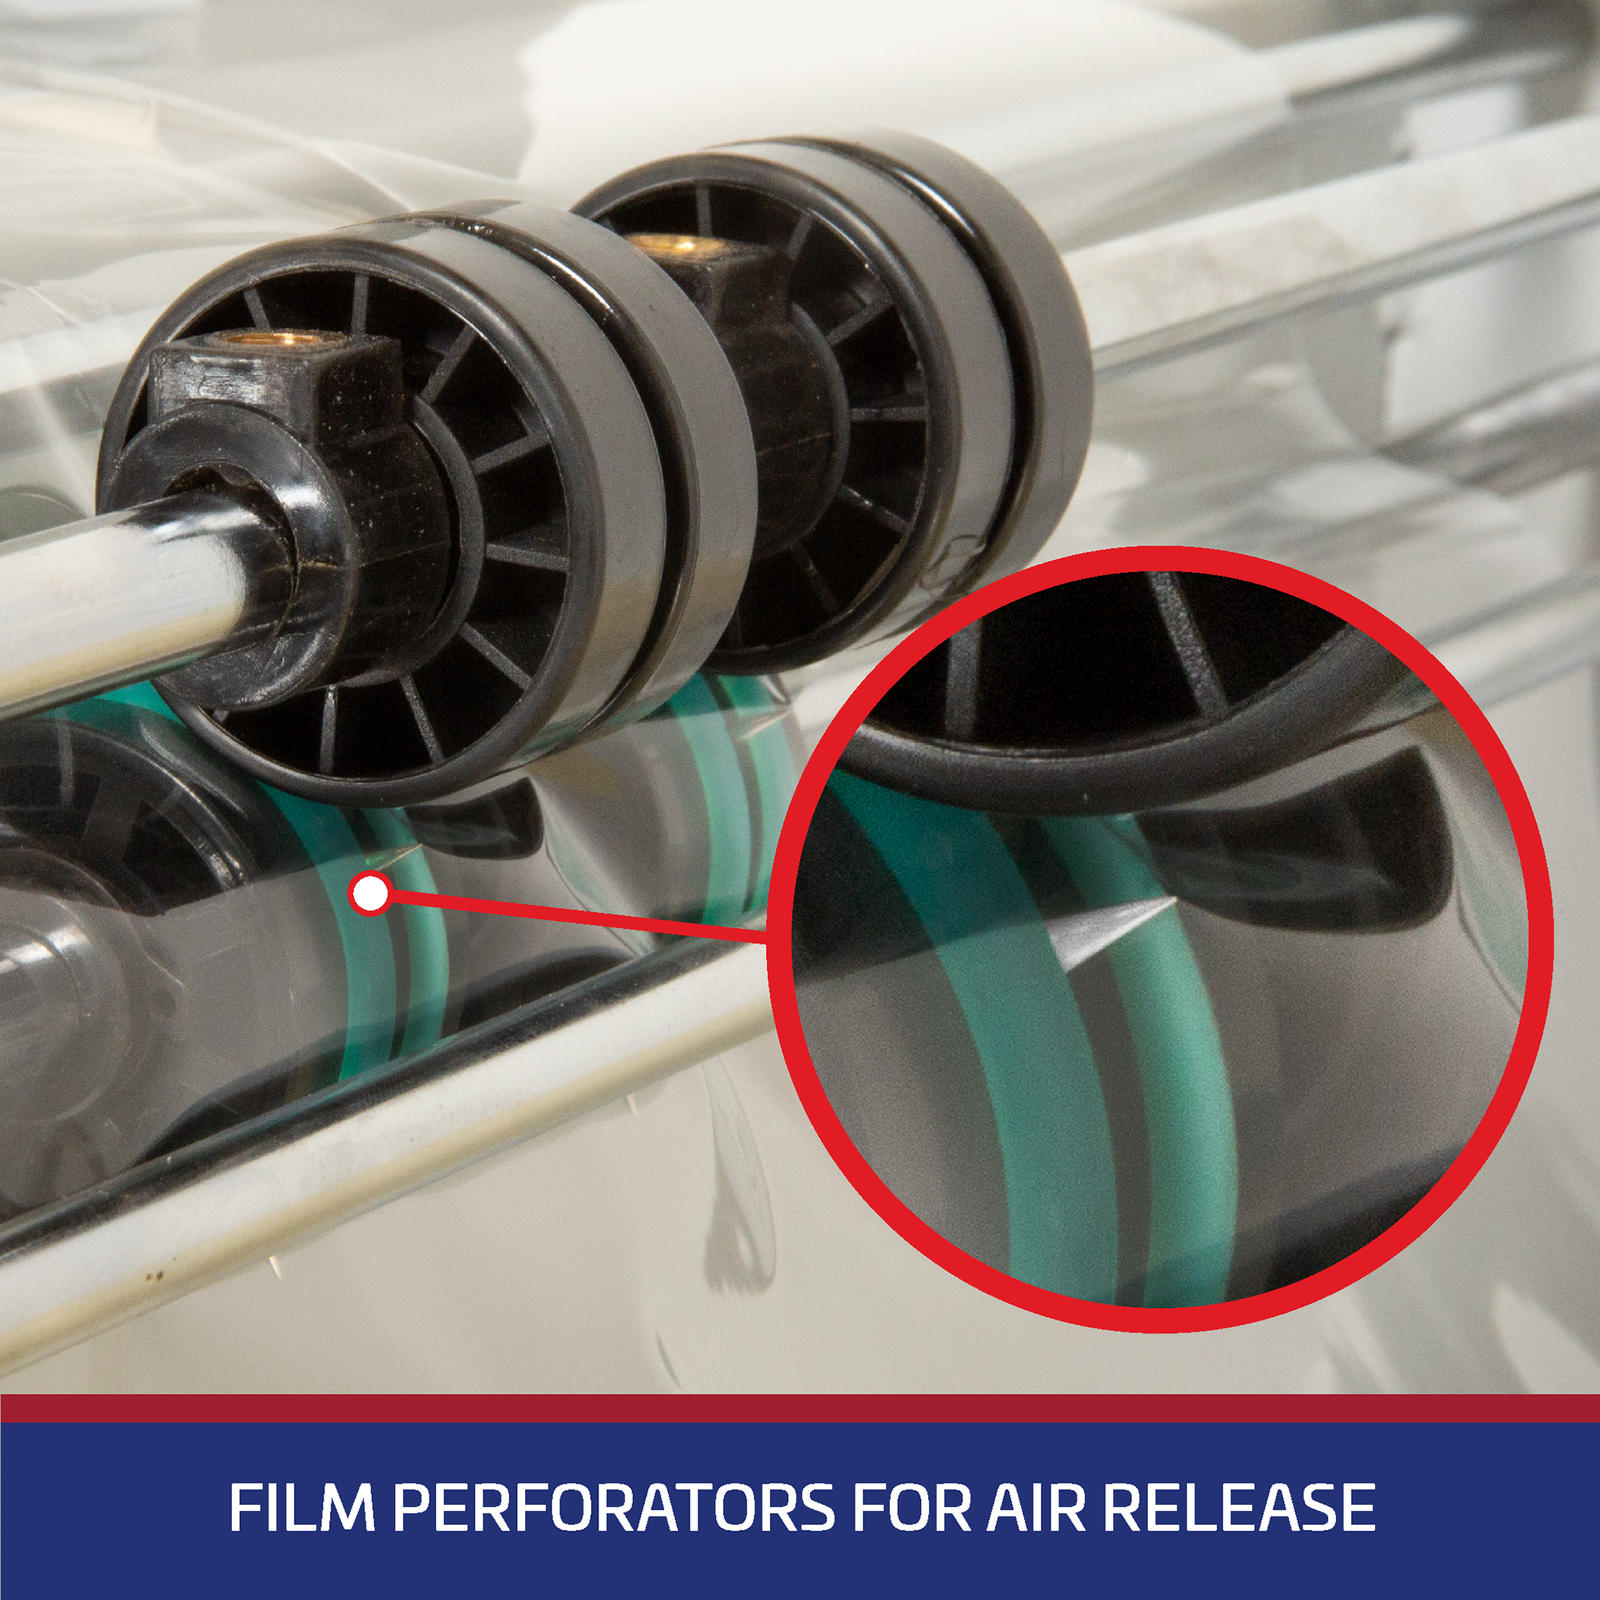 Closeup shows the perforators of the film. Benner reads film perforator for air release. 